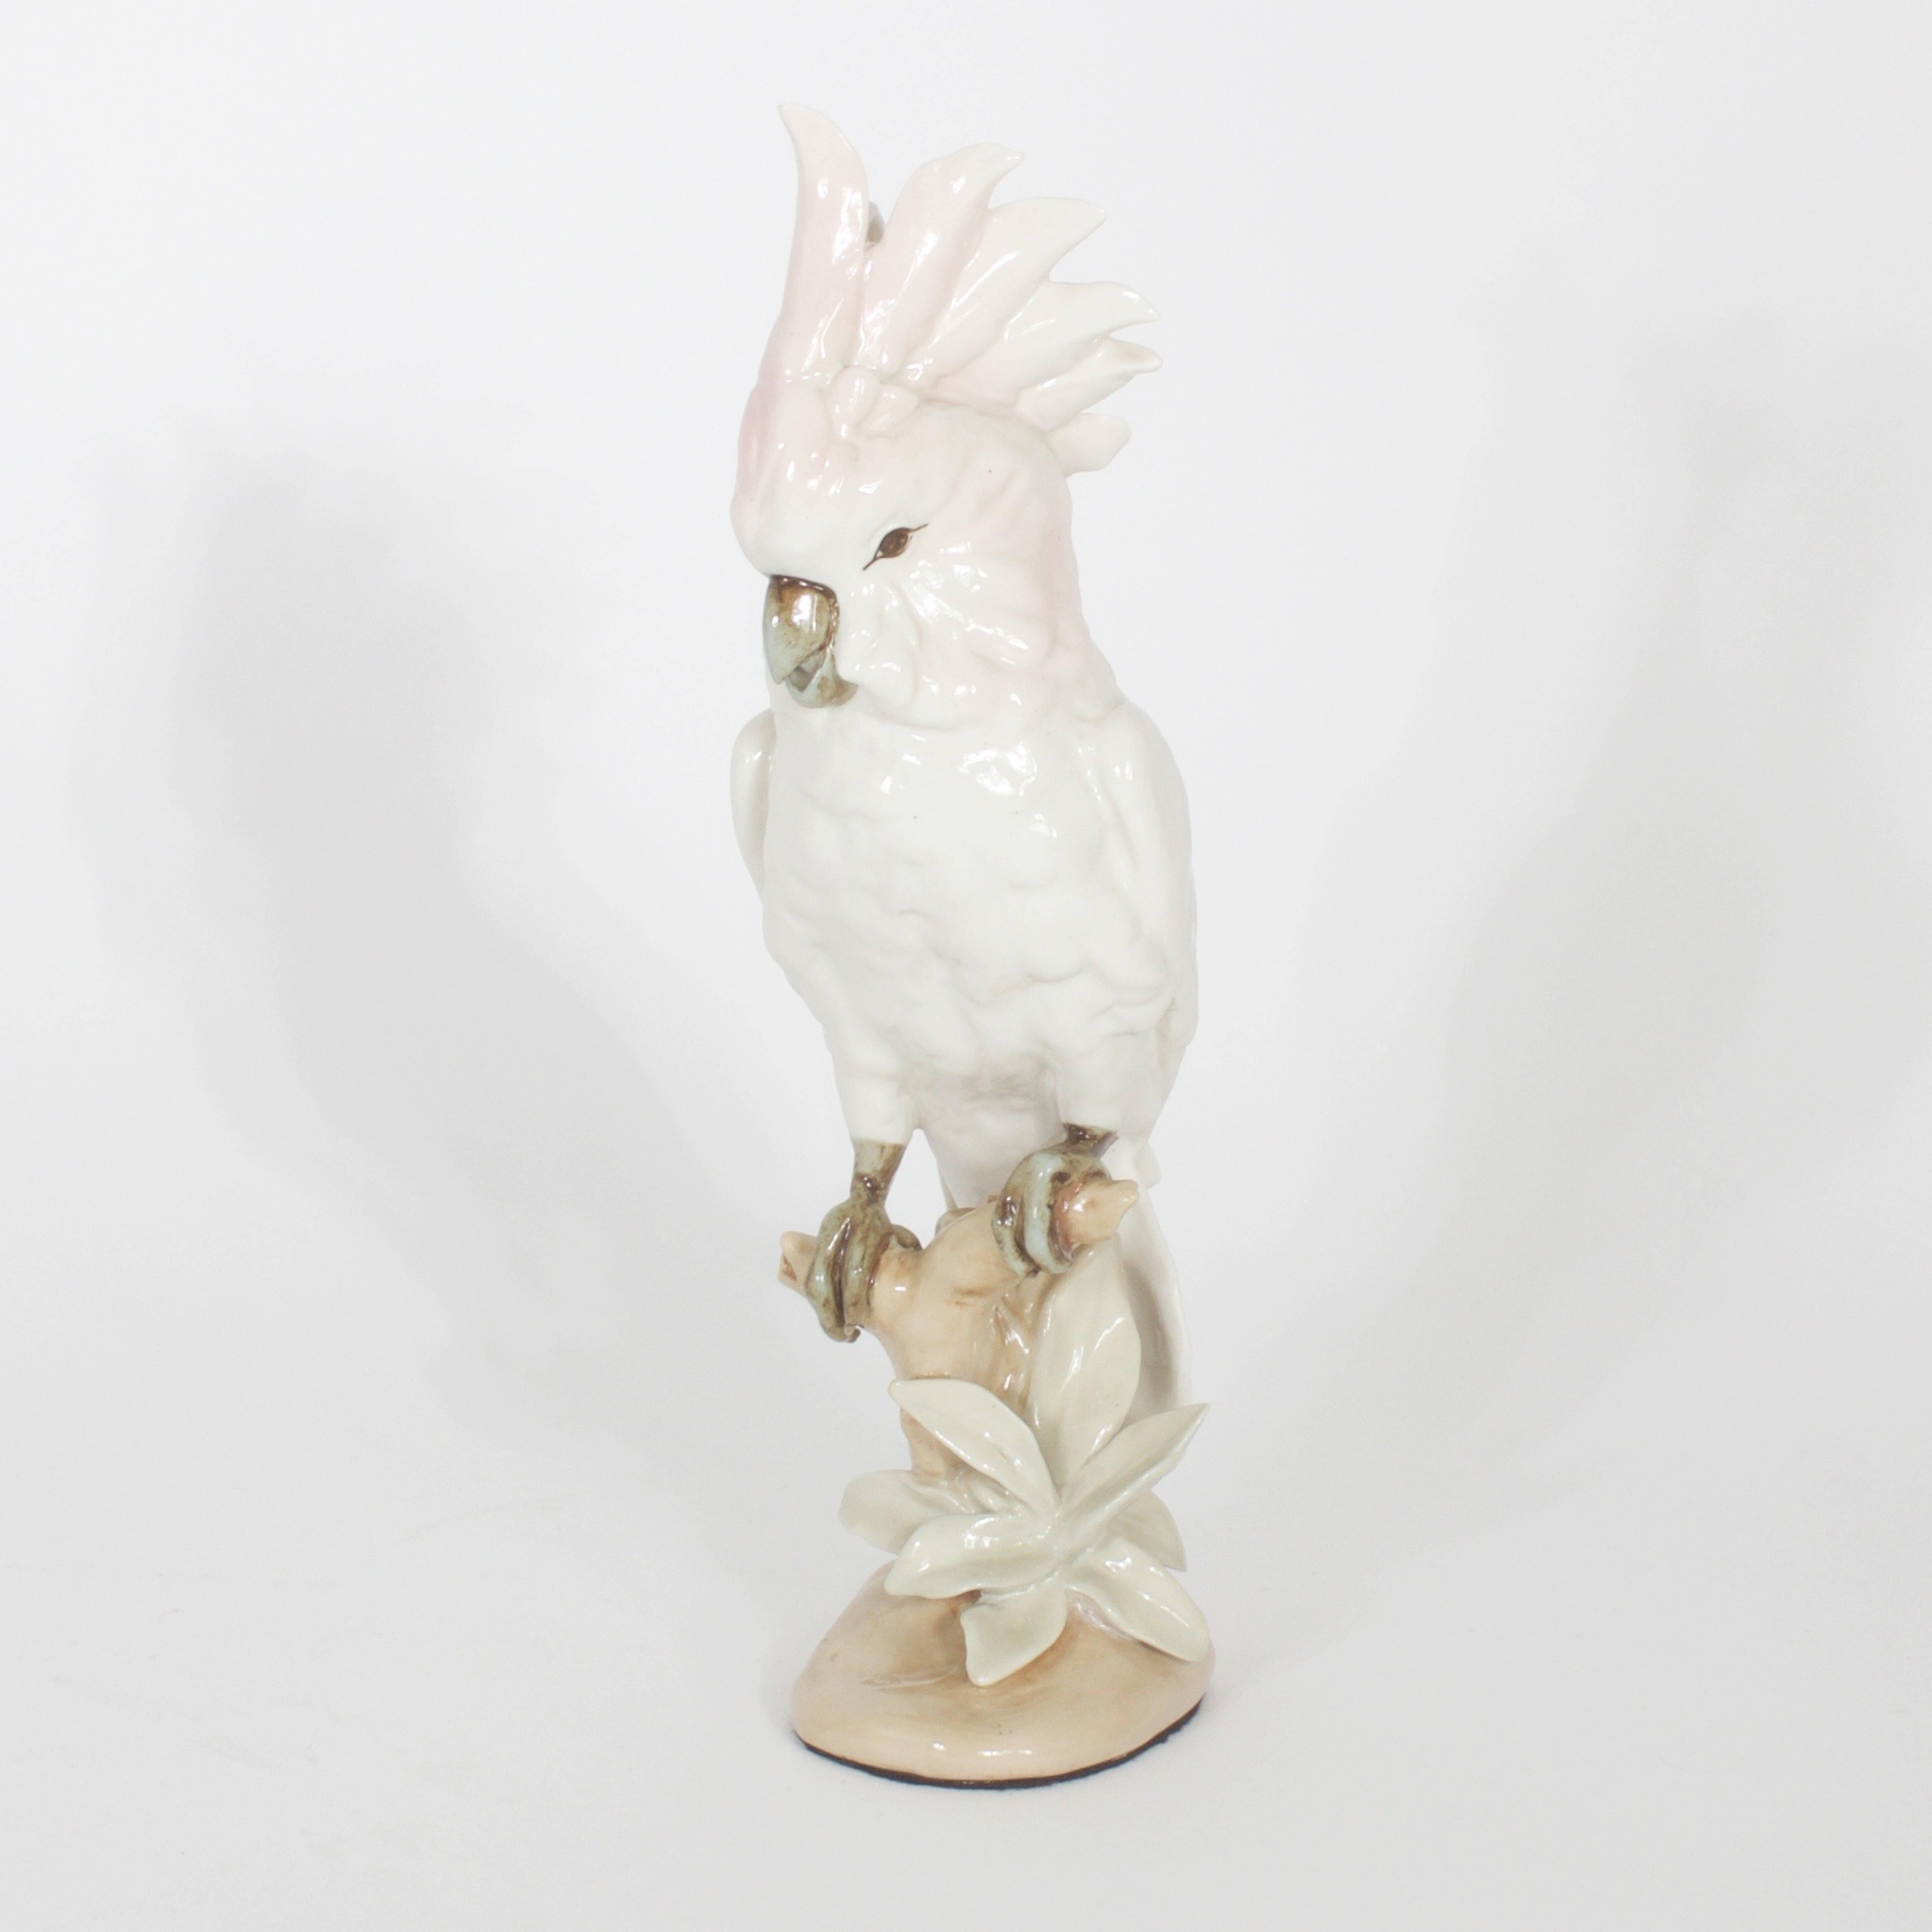 Pair of porcelain cockatoos with a dramatic presence. From their distinctive crests, white and pink plumage, right down to the perch and flower, these objects of art have a big personality. Signed Royal Dux on the bottoms.

